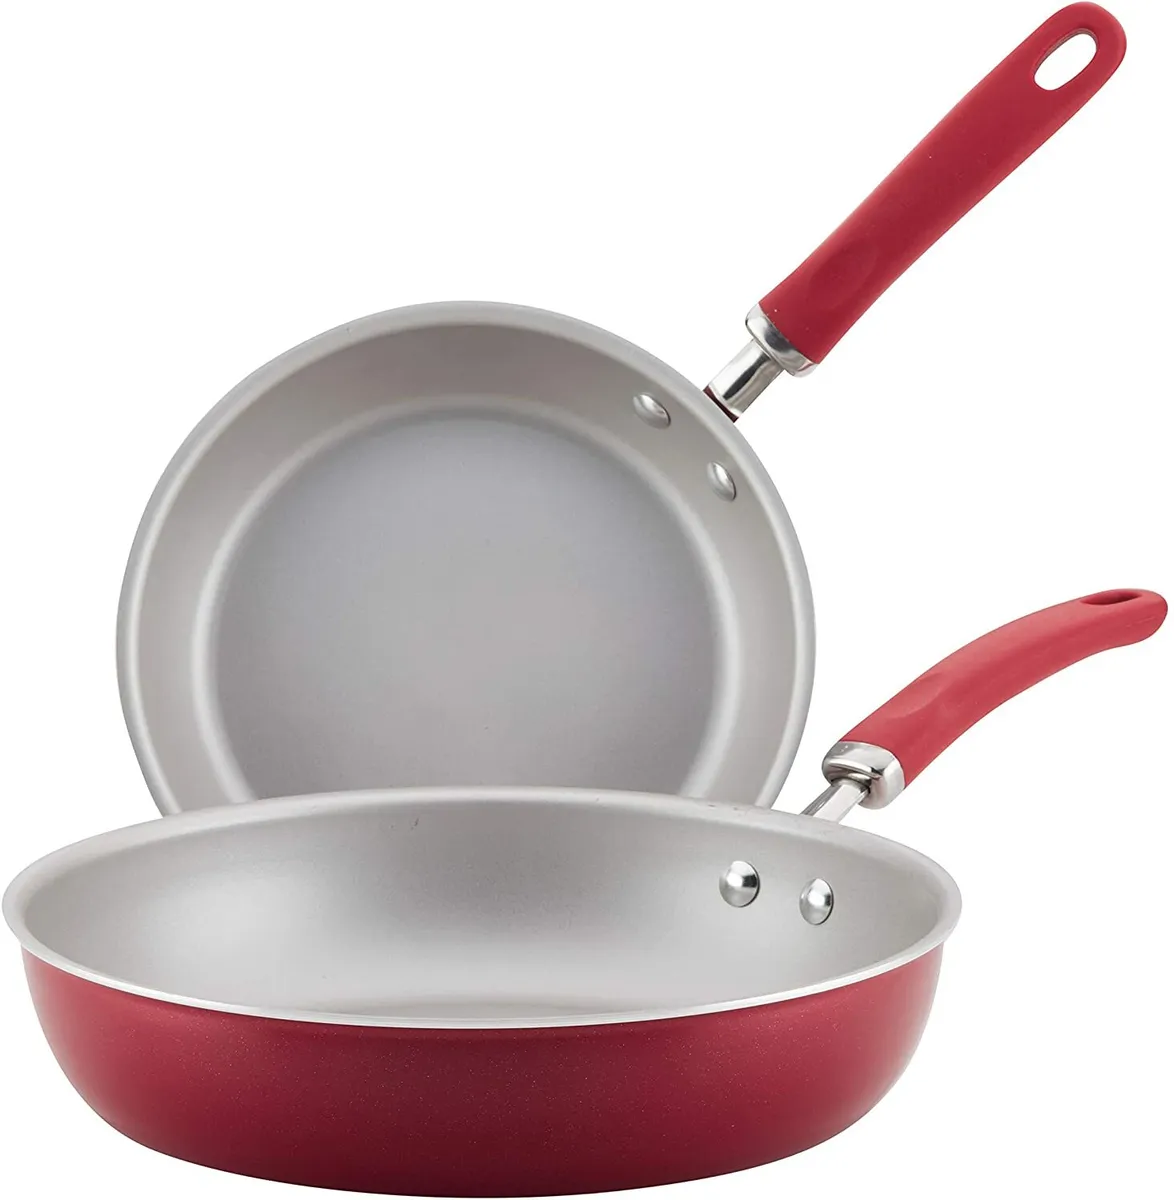 Rachael Ray Create Delicious Nonstick Frying Pan Set, Red Shimmer